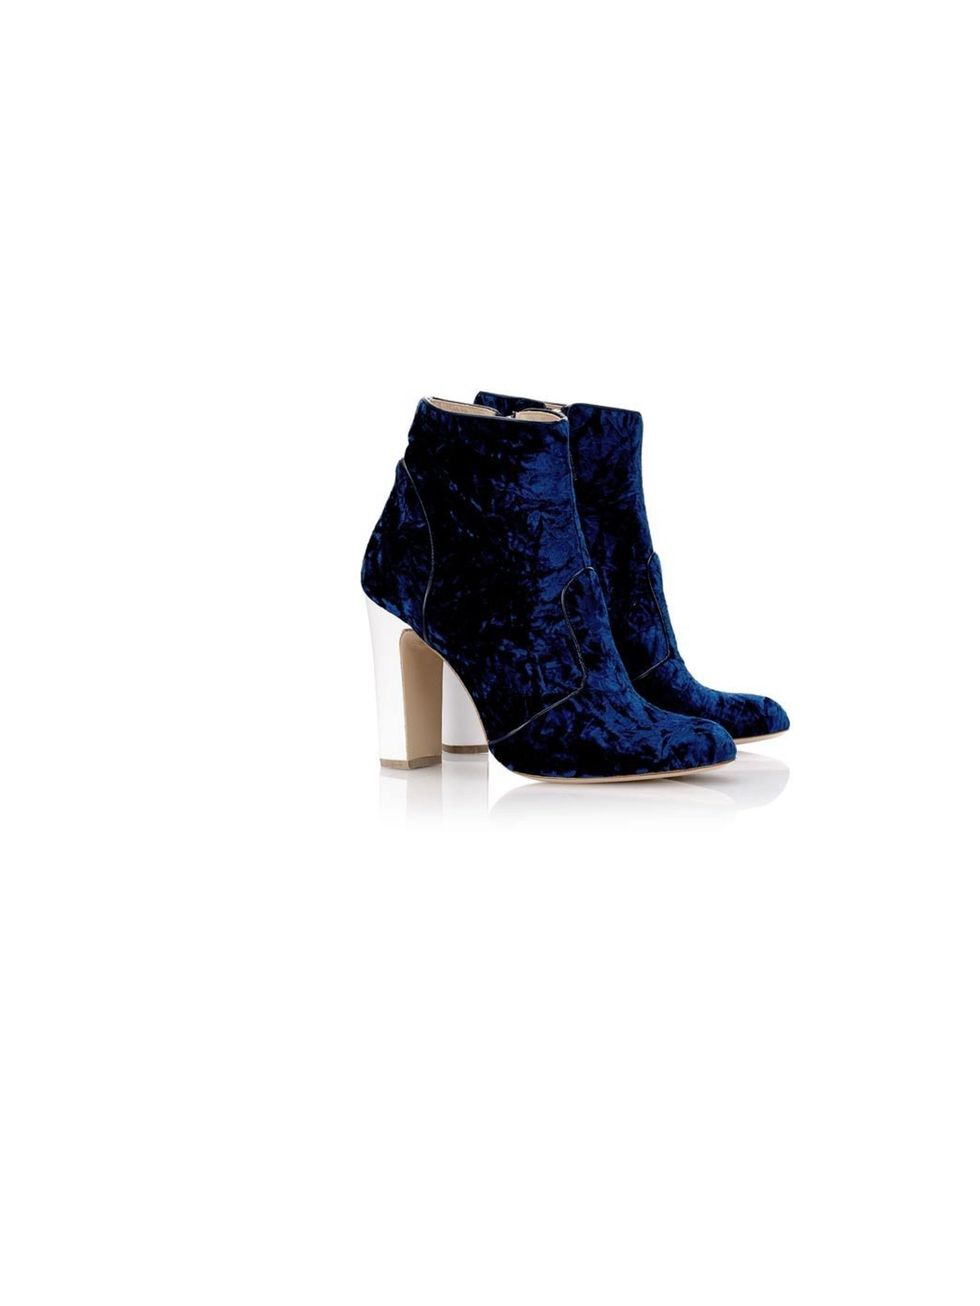 <p>Bionda Castana boots, were £495, now £345, from <a href="http://www.avenue32.com/shoes/all-shoes/110mm-blue-velvet-amelie-boots-01302.html">Avenue32.com</a></p><p>Don't miss out on additional online discount codes and exclusive sale tips only in this m